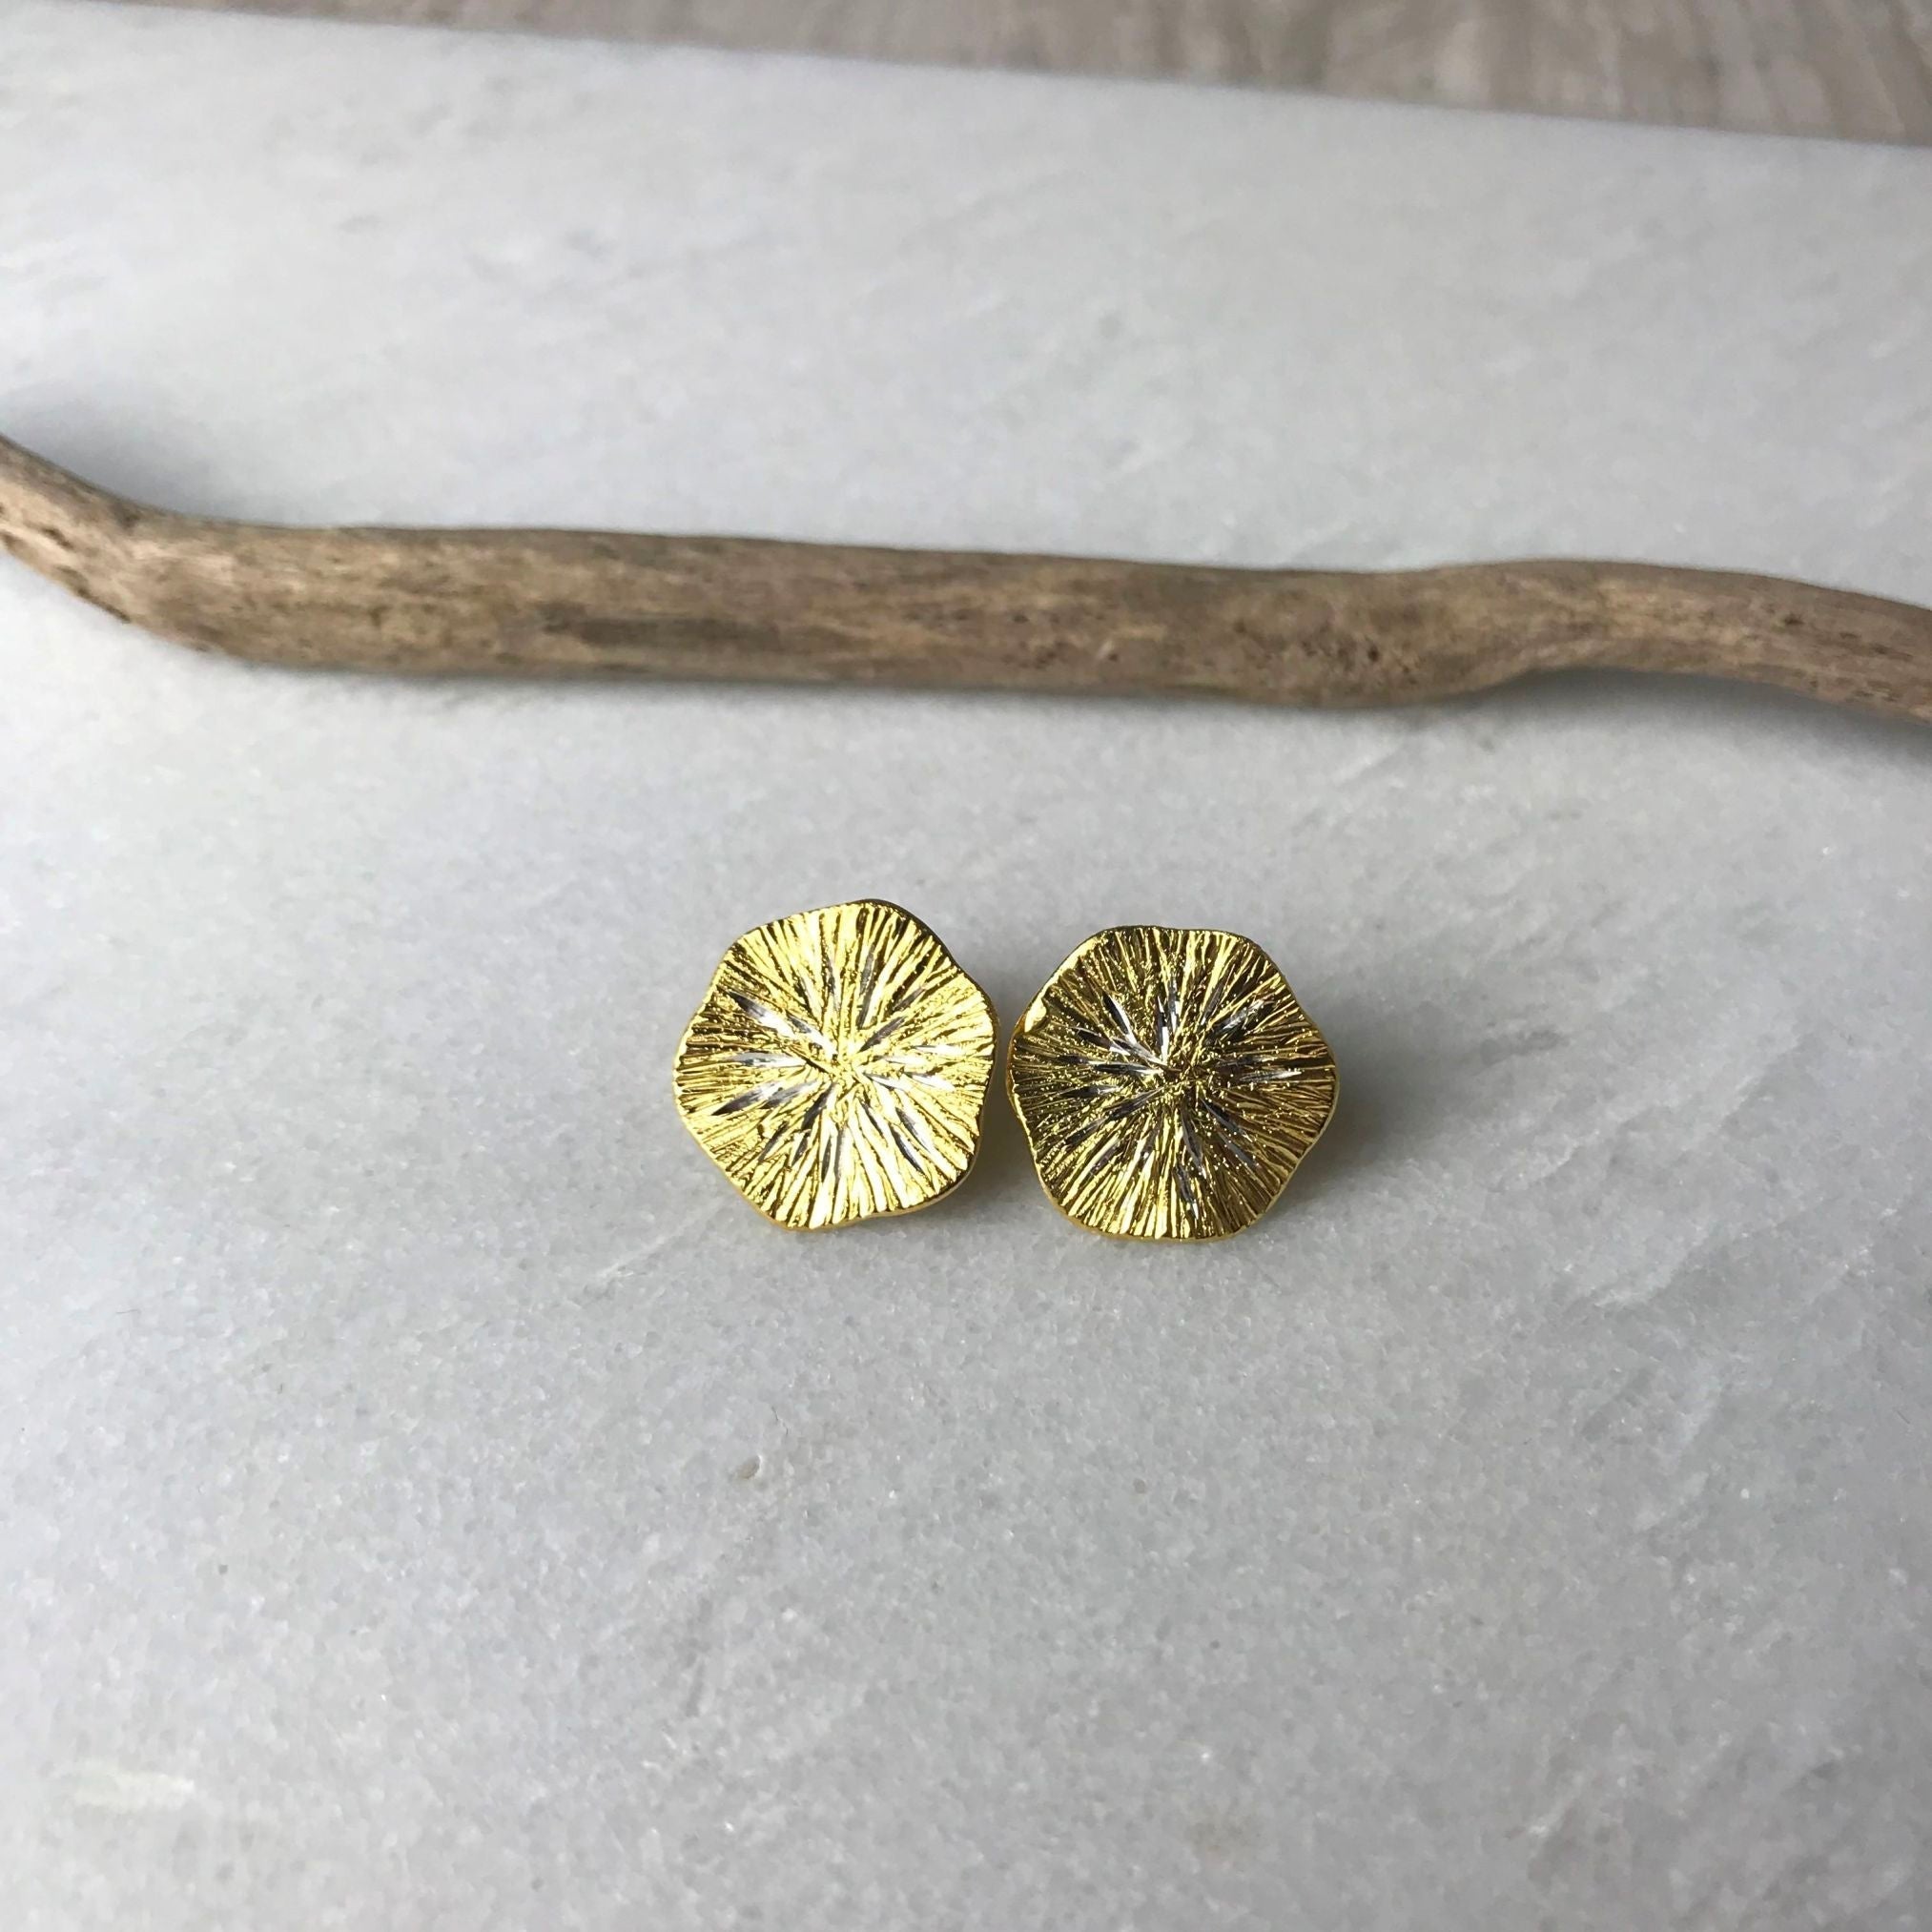 Gold Textured Disc Earrings - The Nancy Smillie Shop - Art, Jewellery & Designer Gifts Glasgow